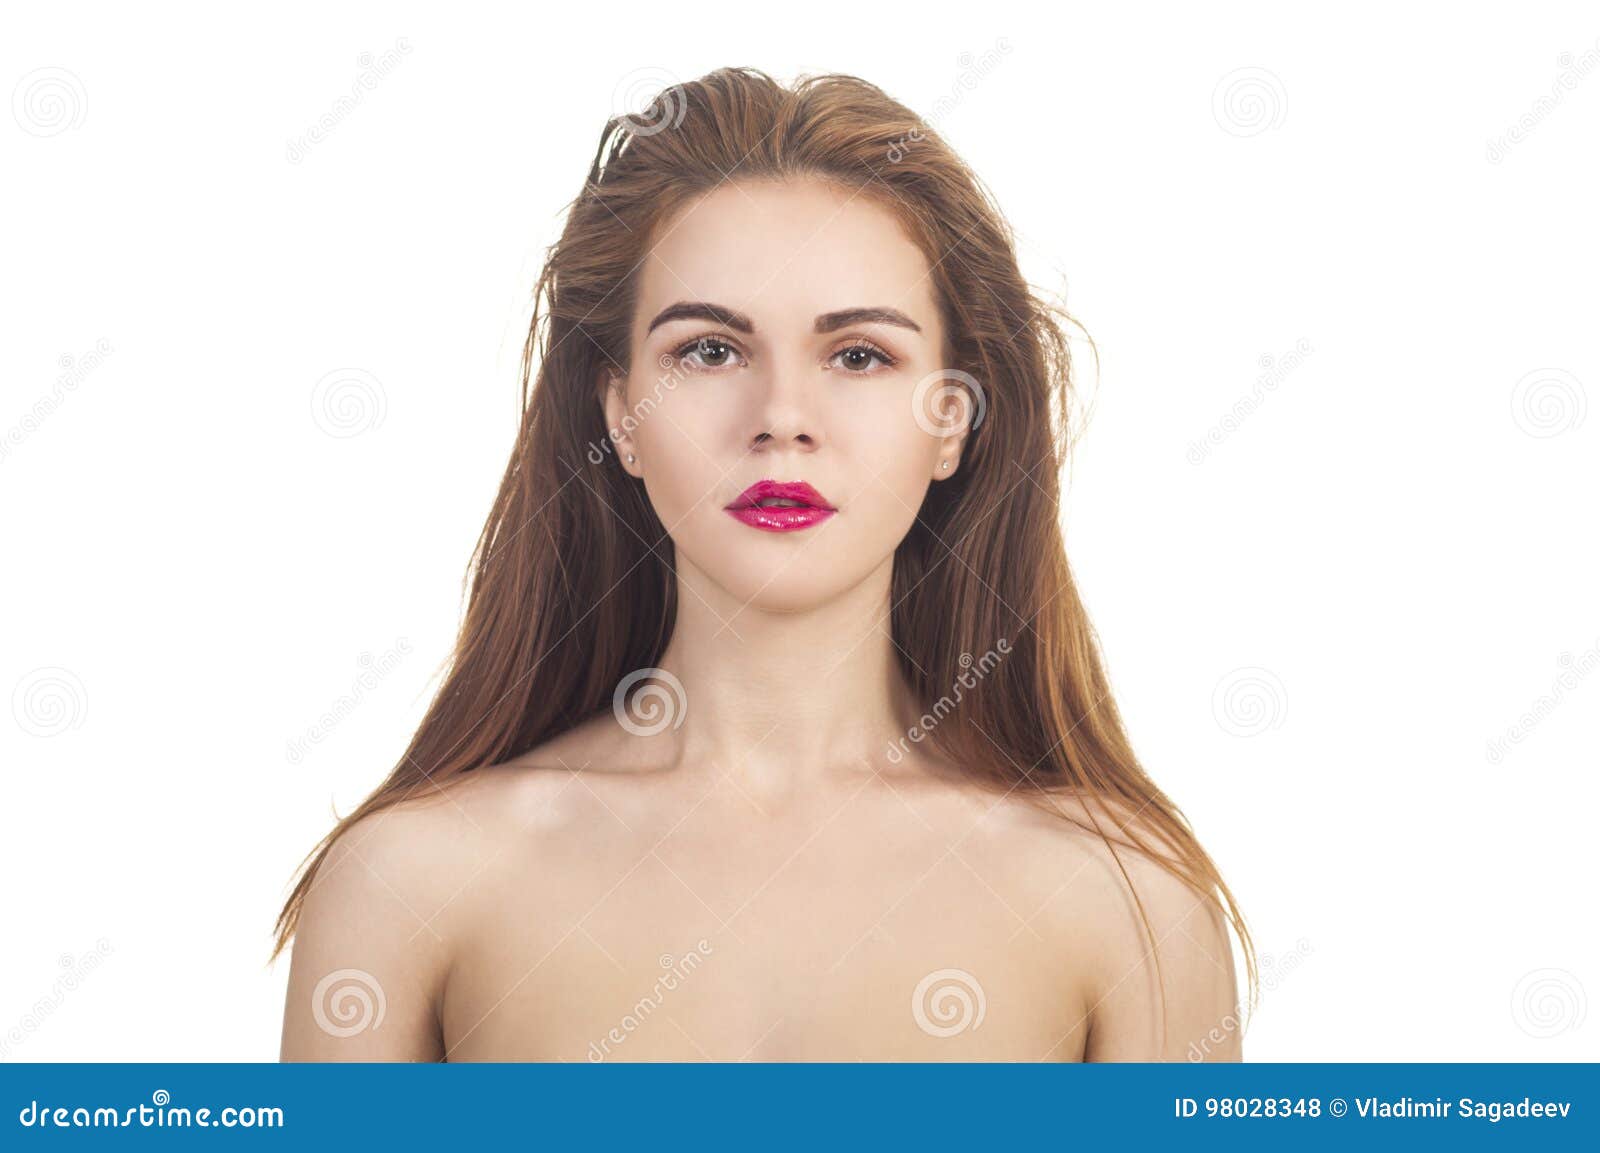 An Emotional Portrait, a Naked Girl on a White Background. Stock